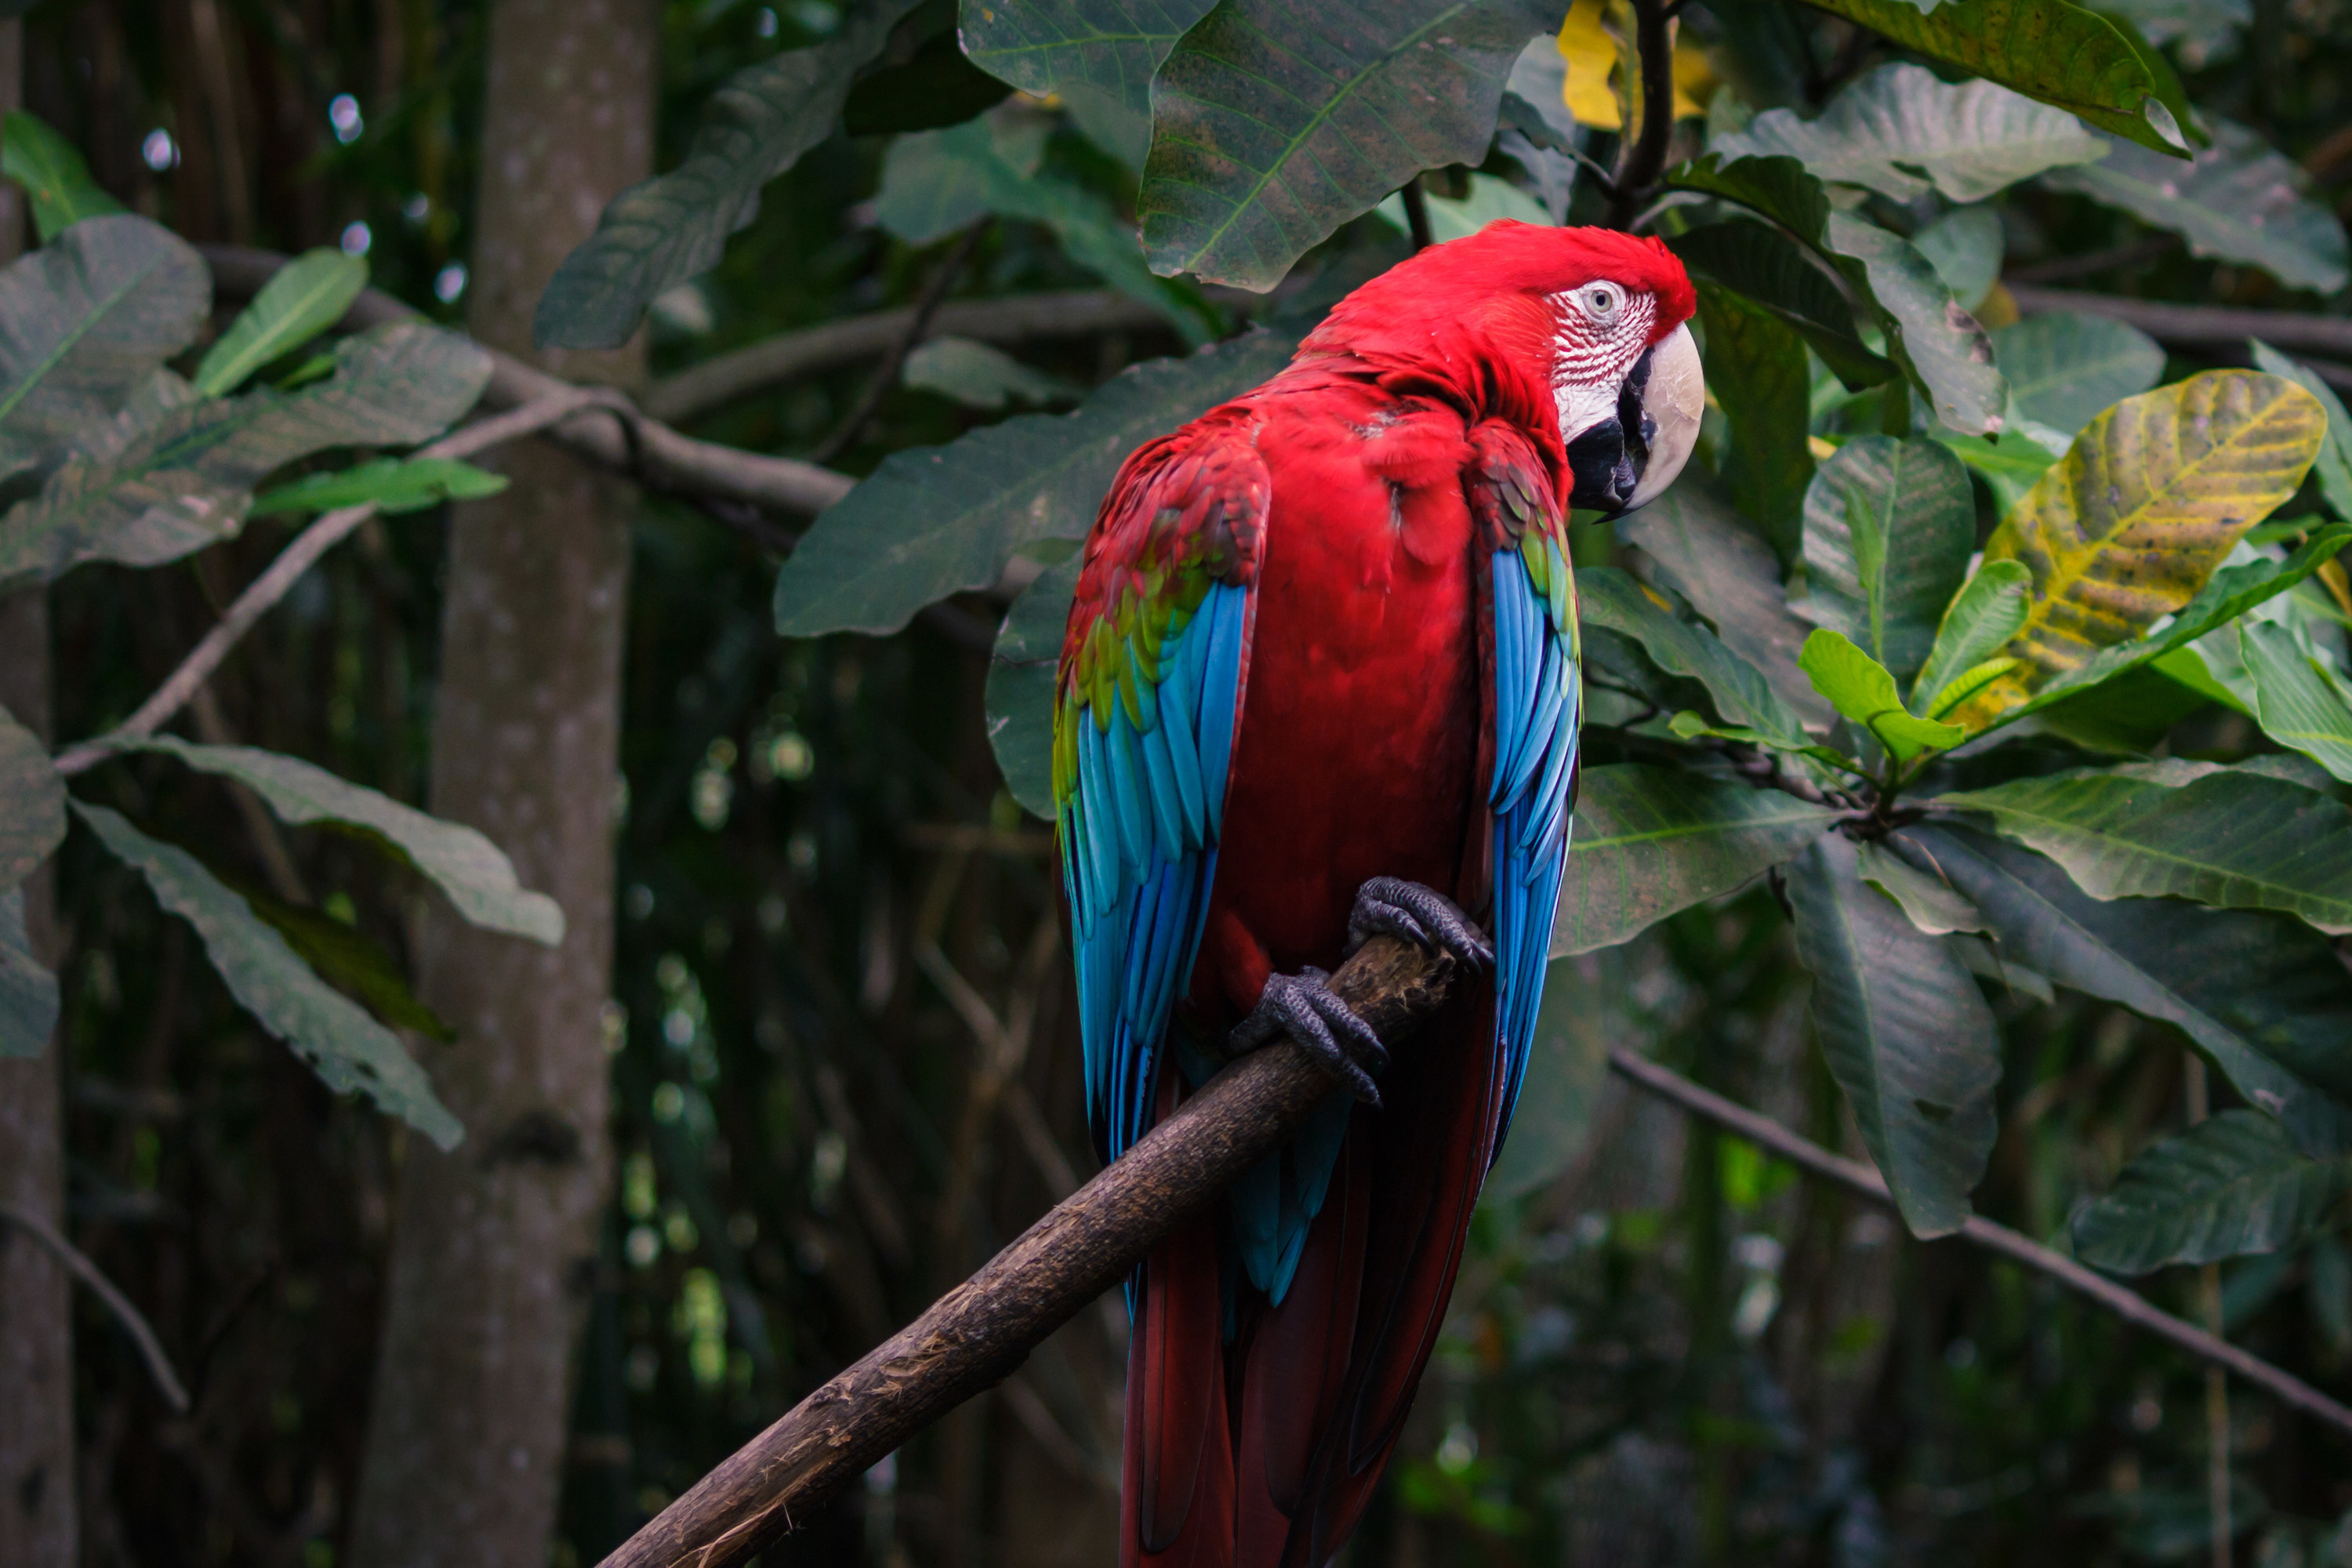 Red big parrot